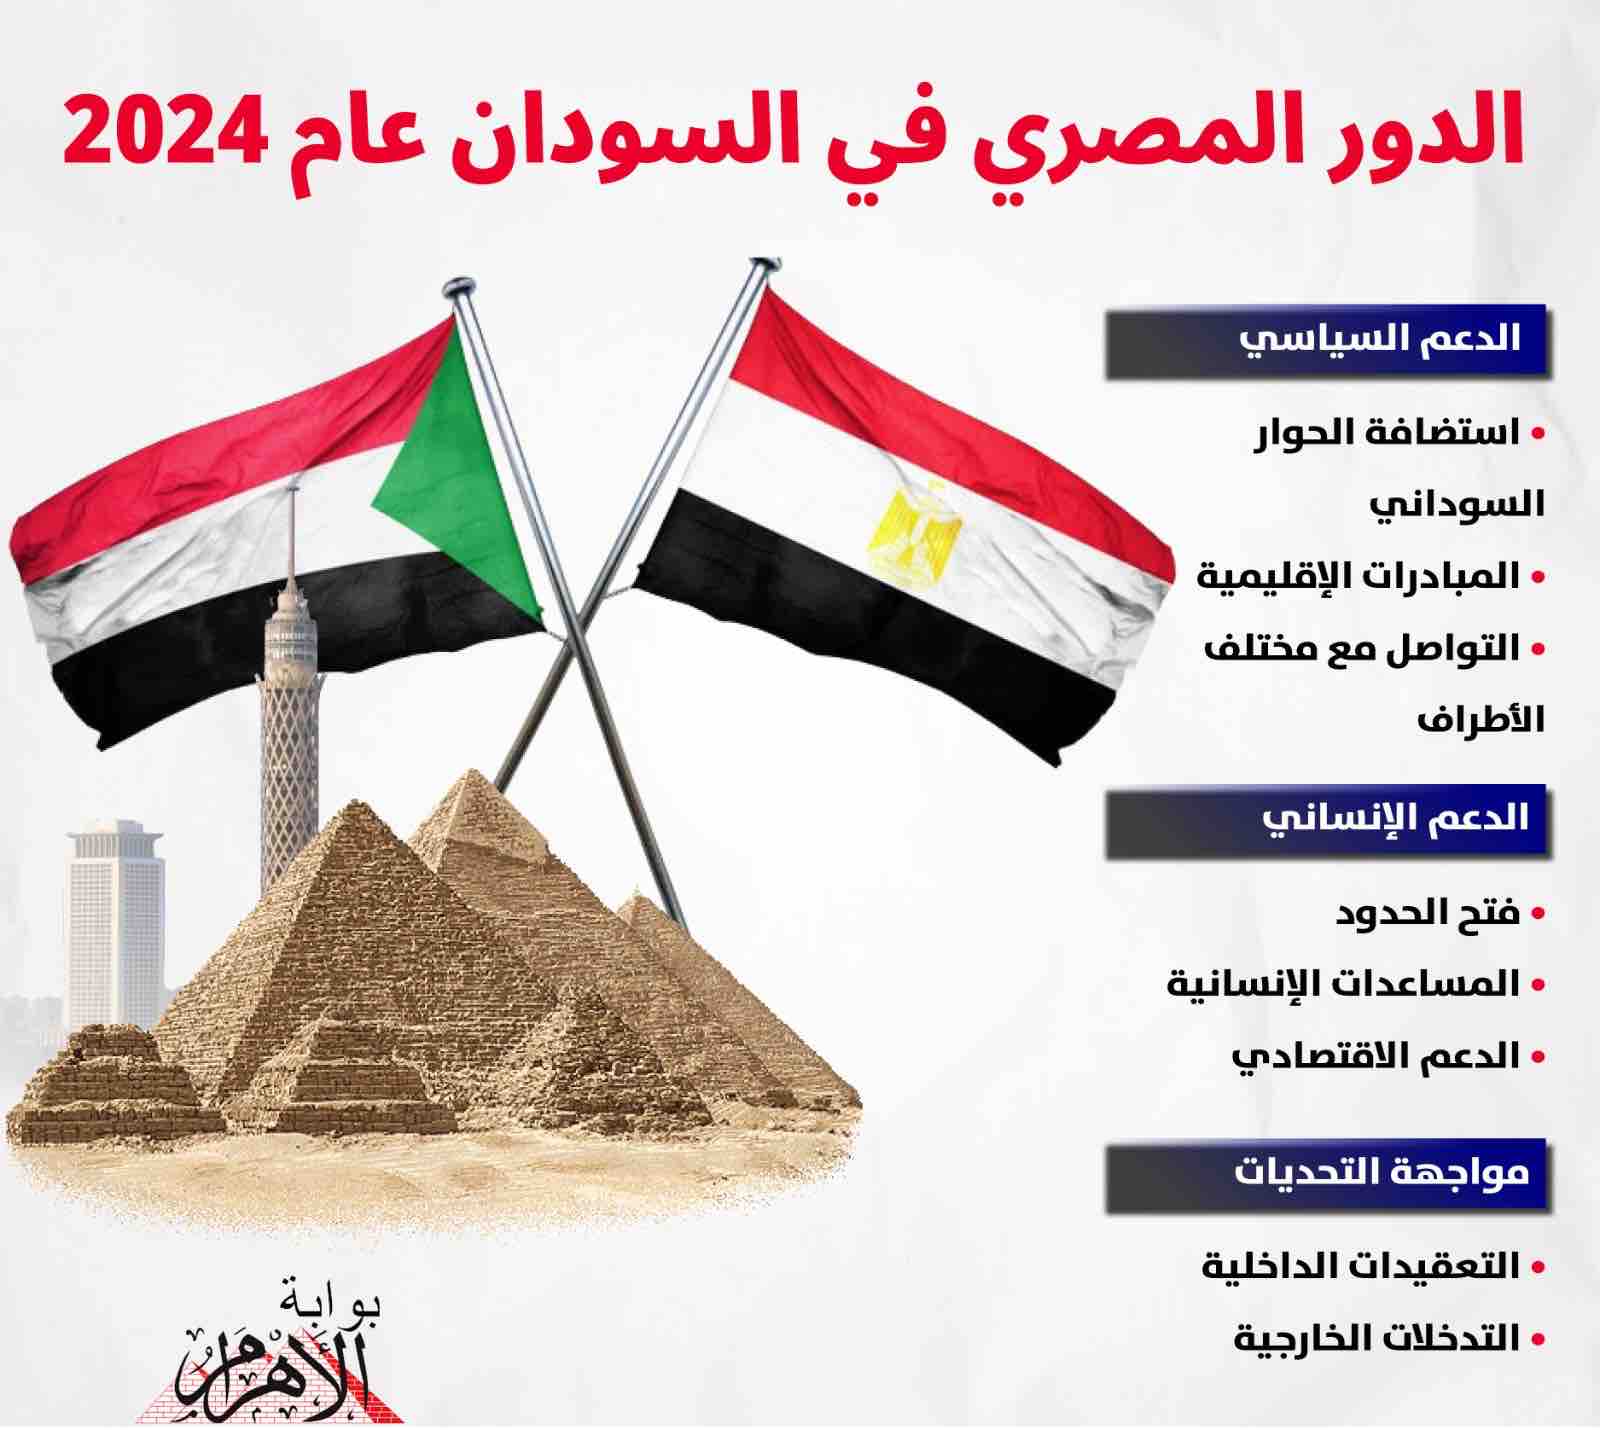 June 30.. Egyptian efforts to stabilize Sudan and overcome its current crisis